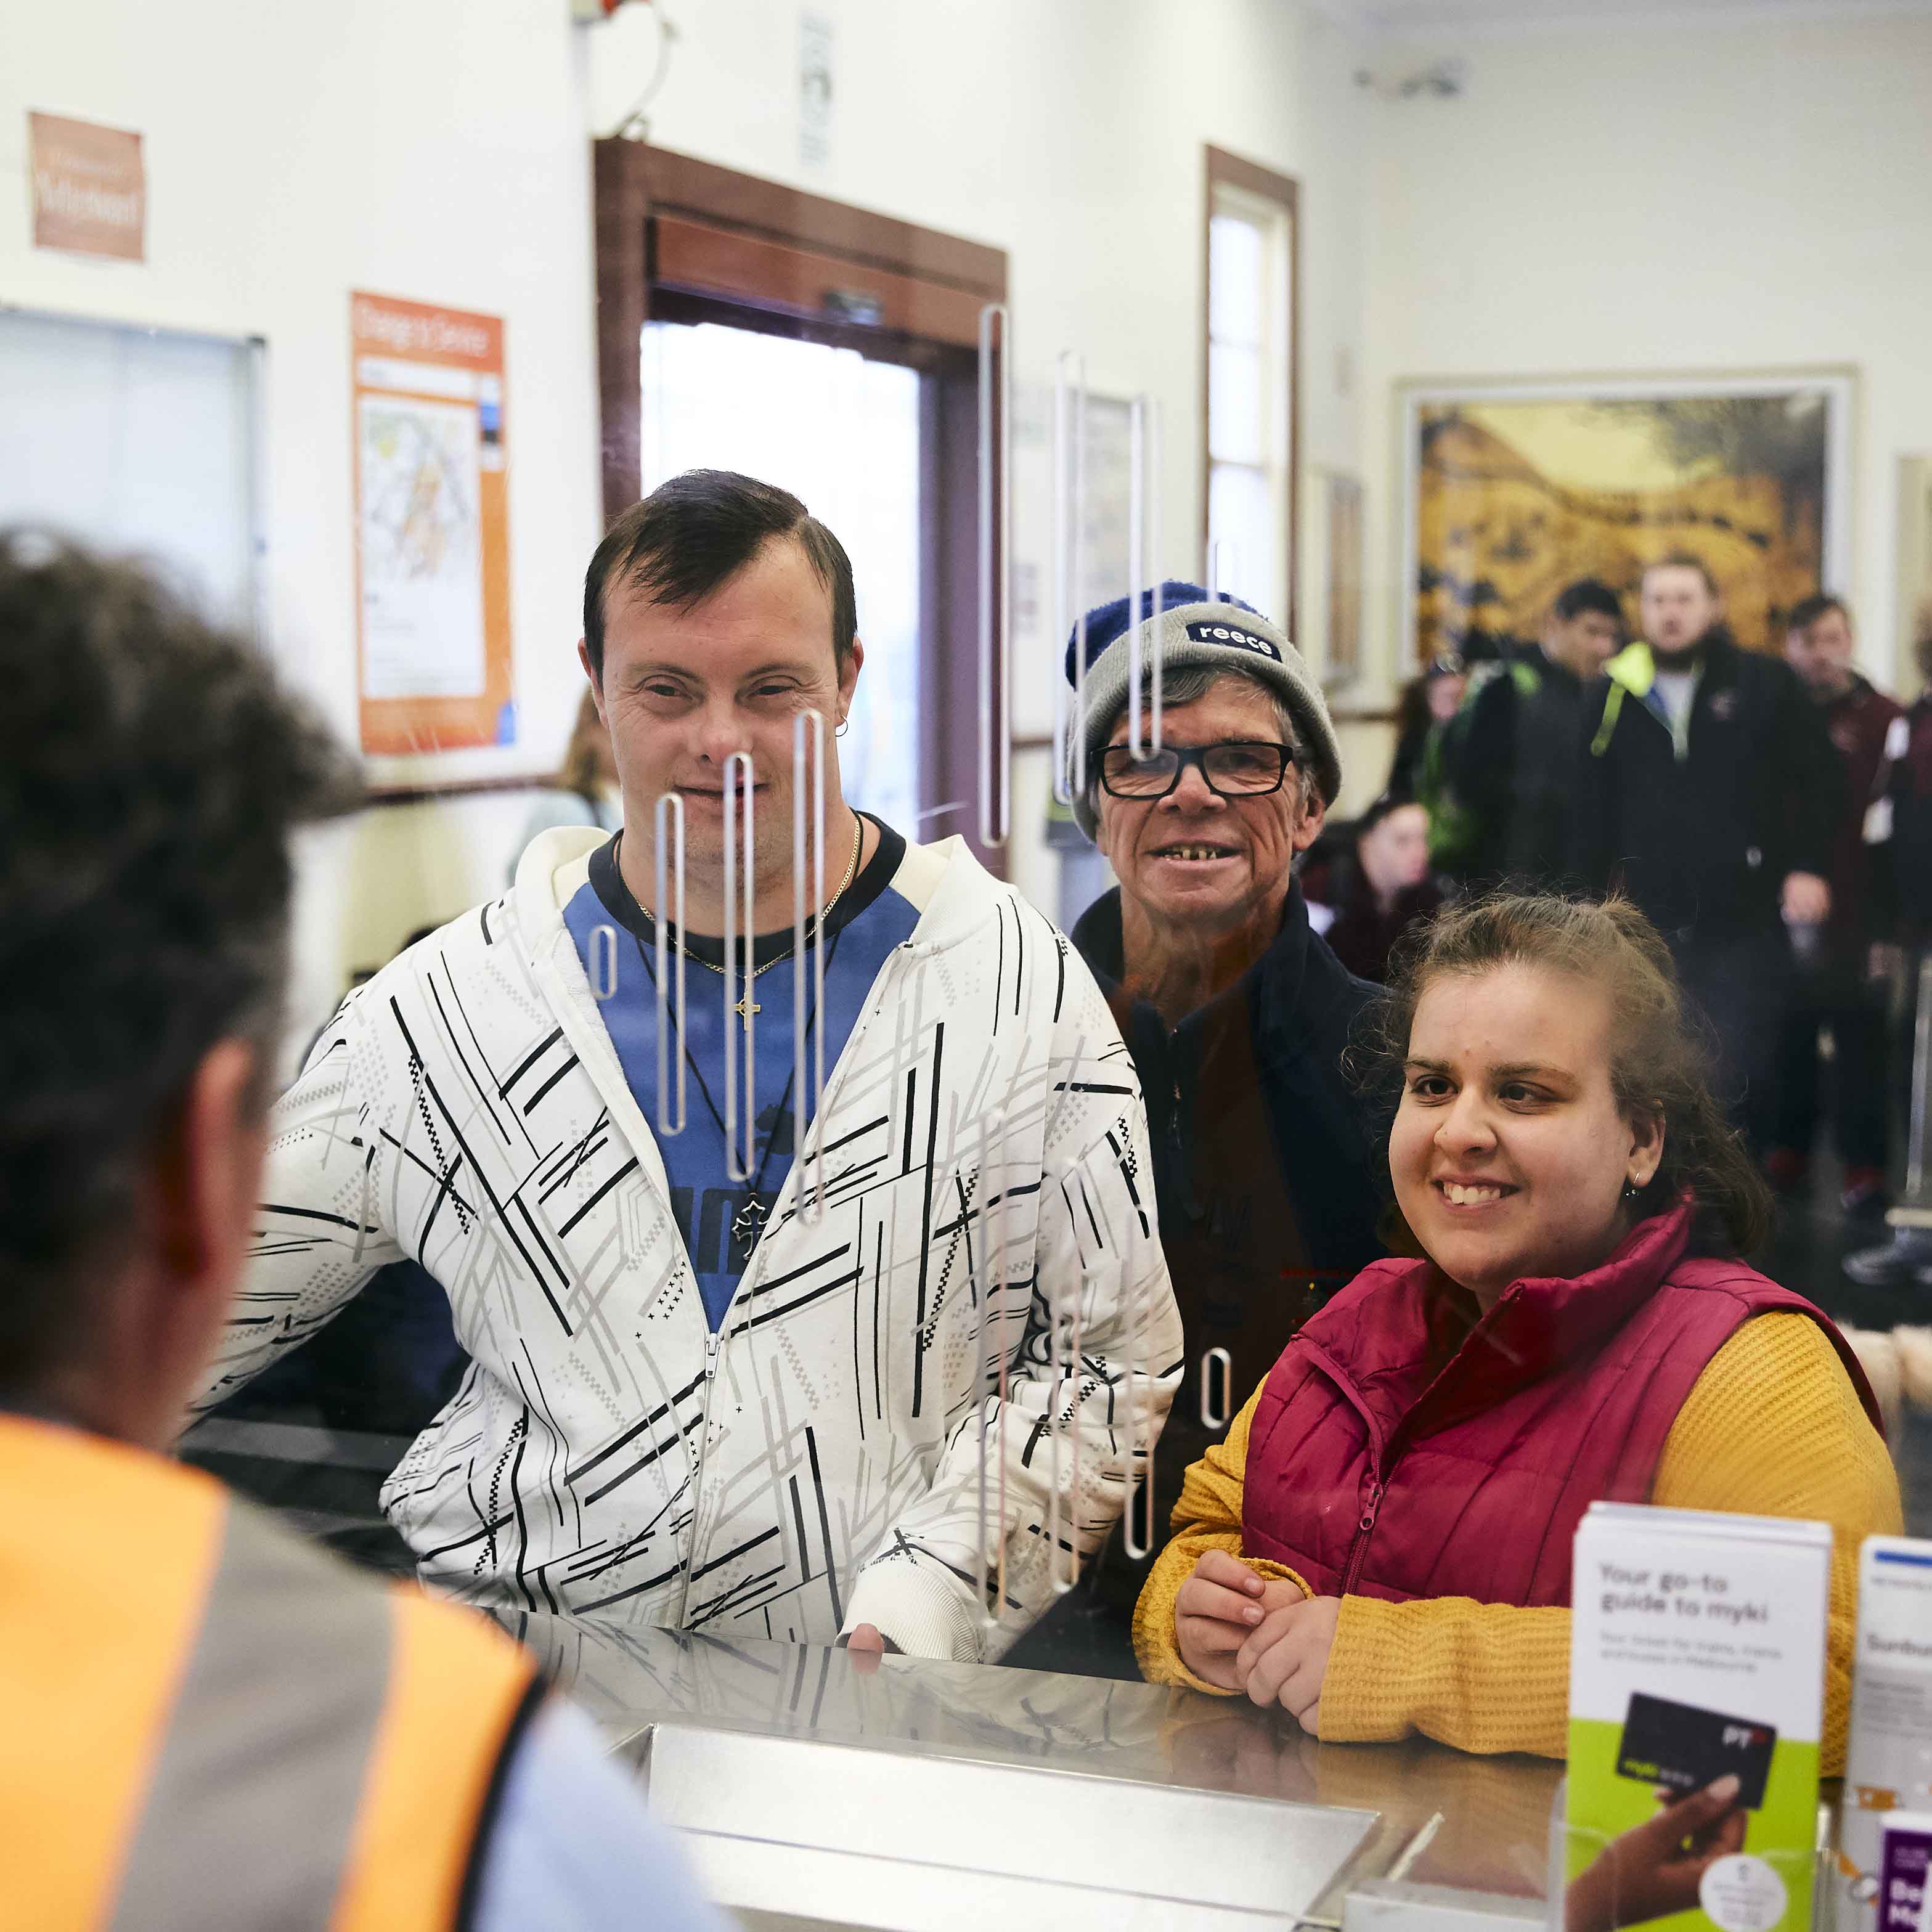 Image is a photograph of three people with disabilities standing at the service desk of a train station.